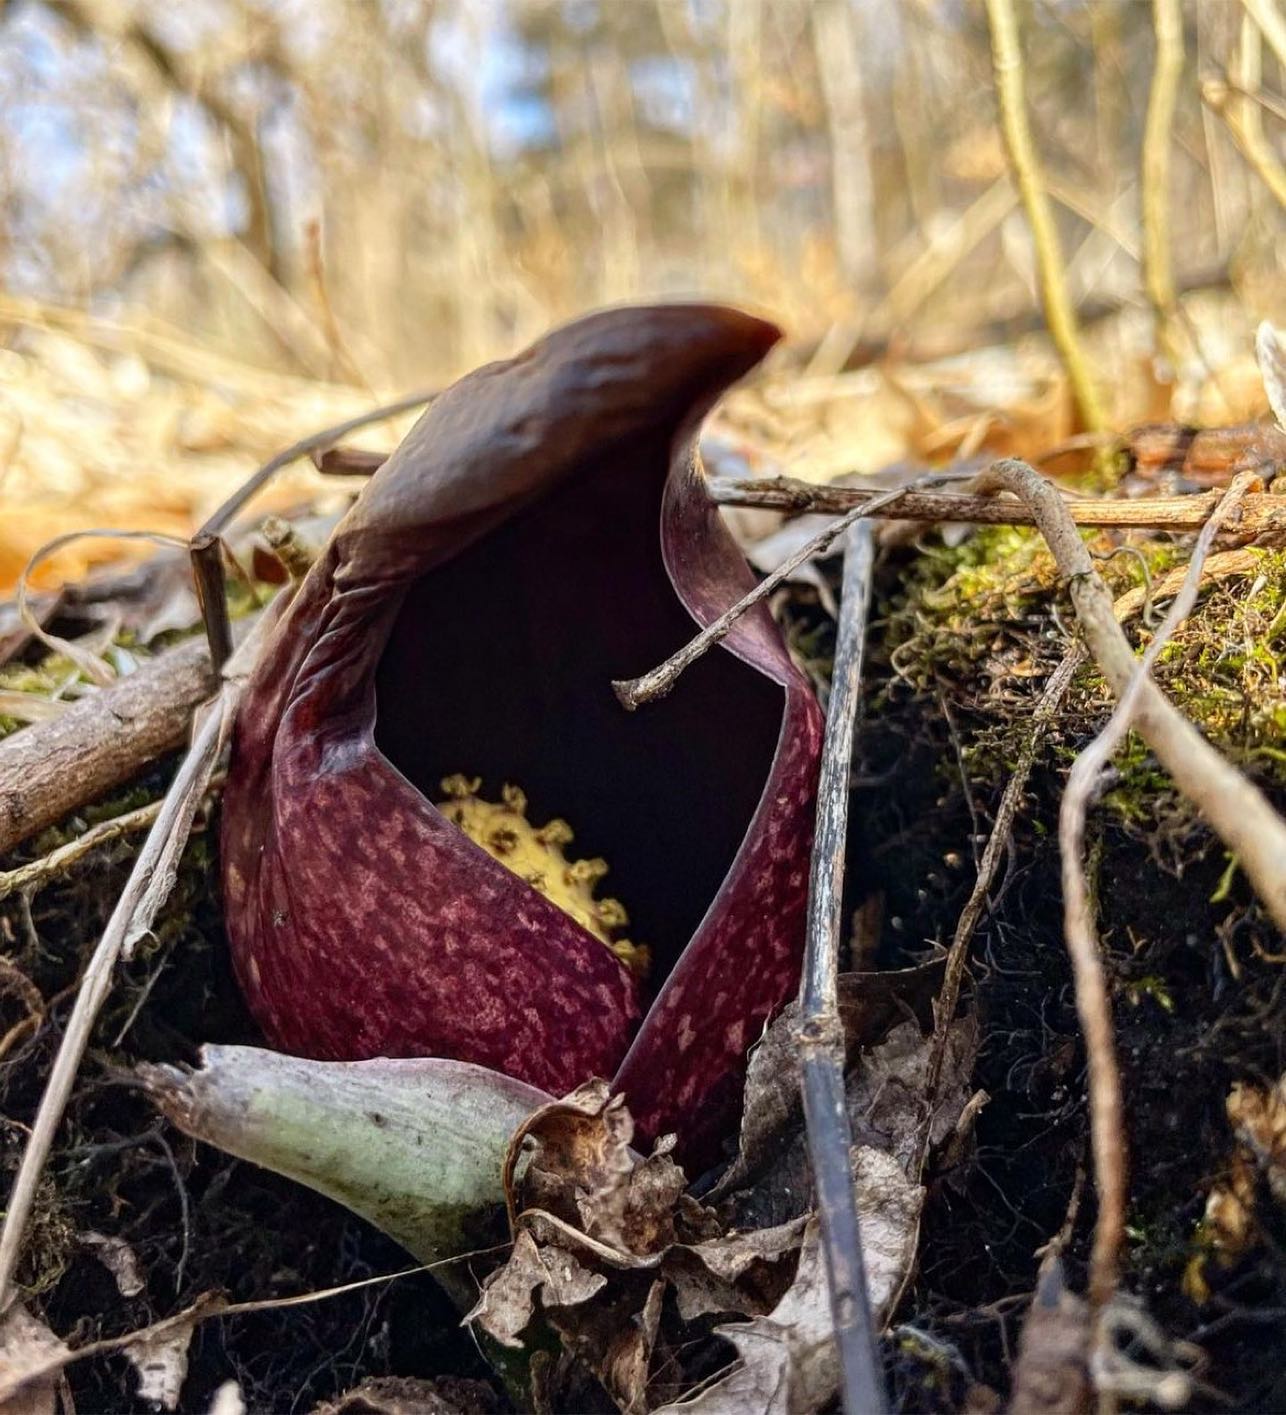 We love learning from all of you. Check out this post by @mnprairiegal•The flower of the skunk cabbage (Symplocarpus foetidus) is quite different than most others found native to Minnesota. .The part that come out of the ground is the spathe. As the spathe grows, it reveals the spadix, a small knob covered with tiny yellow flowers..Few other flowers in northeastern North America share this odd floral structure – a characteristic of plants in the largely tropical Arum family, which includes popular houseplants like Spathiphyllum (peace lily), Philodendron, and Monstera..Like some other related plants in the Arum family, skunk cabbage flowers are all female when the spathe first opens. These later become pollen-producing male flowers, with flowers at the top of the spadix transitioning first. Heat production peaks during the female phase, declining as the flowers age and begin to produce pollen..How cool is that!? Get out and enjoy spring. .....#mn #minnesota #arum #skunkcabbage #exploremn #hike #hiking #botany #plants #plantsofinstagram #nativeflora #springtime #optoutside #outdoors #spring #flower #flowerstagram #mnupstream #lovewhereyoulive #upstream #exploremn — from Instagram